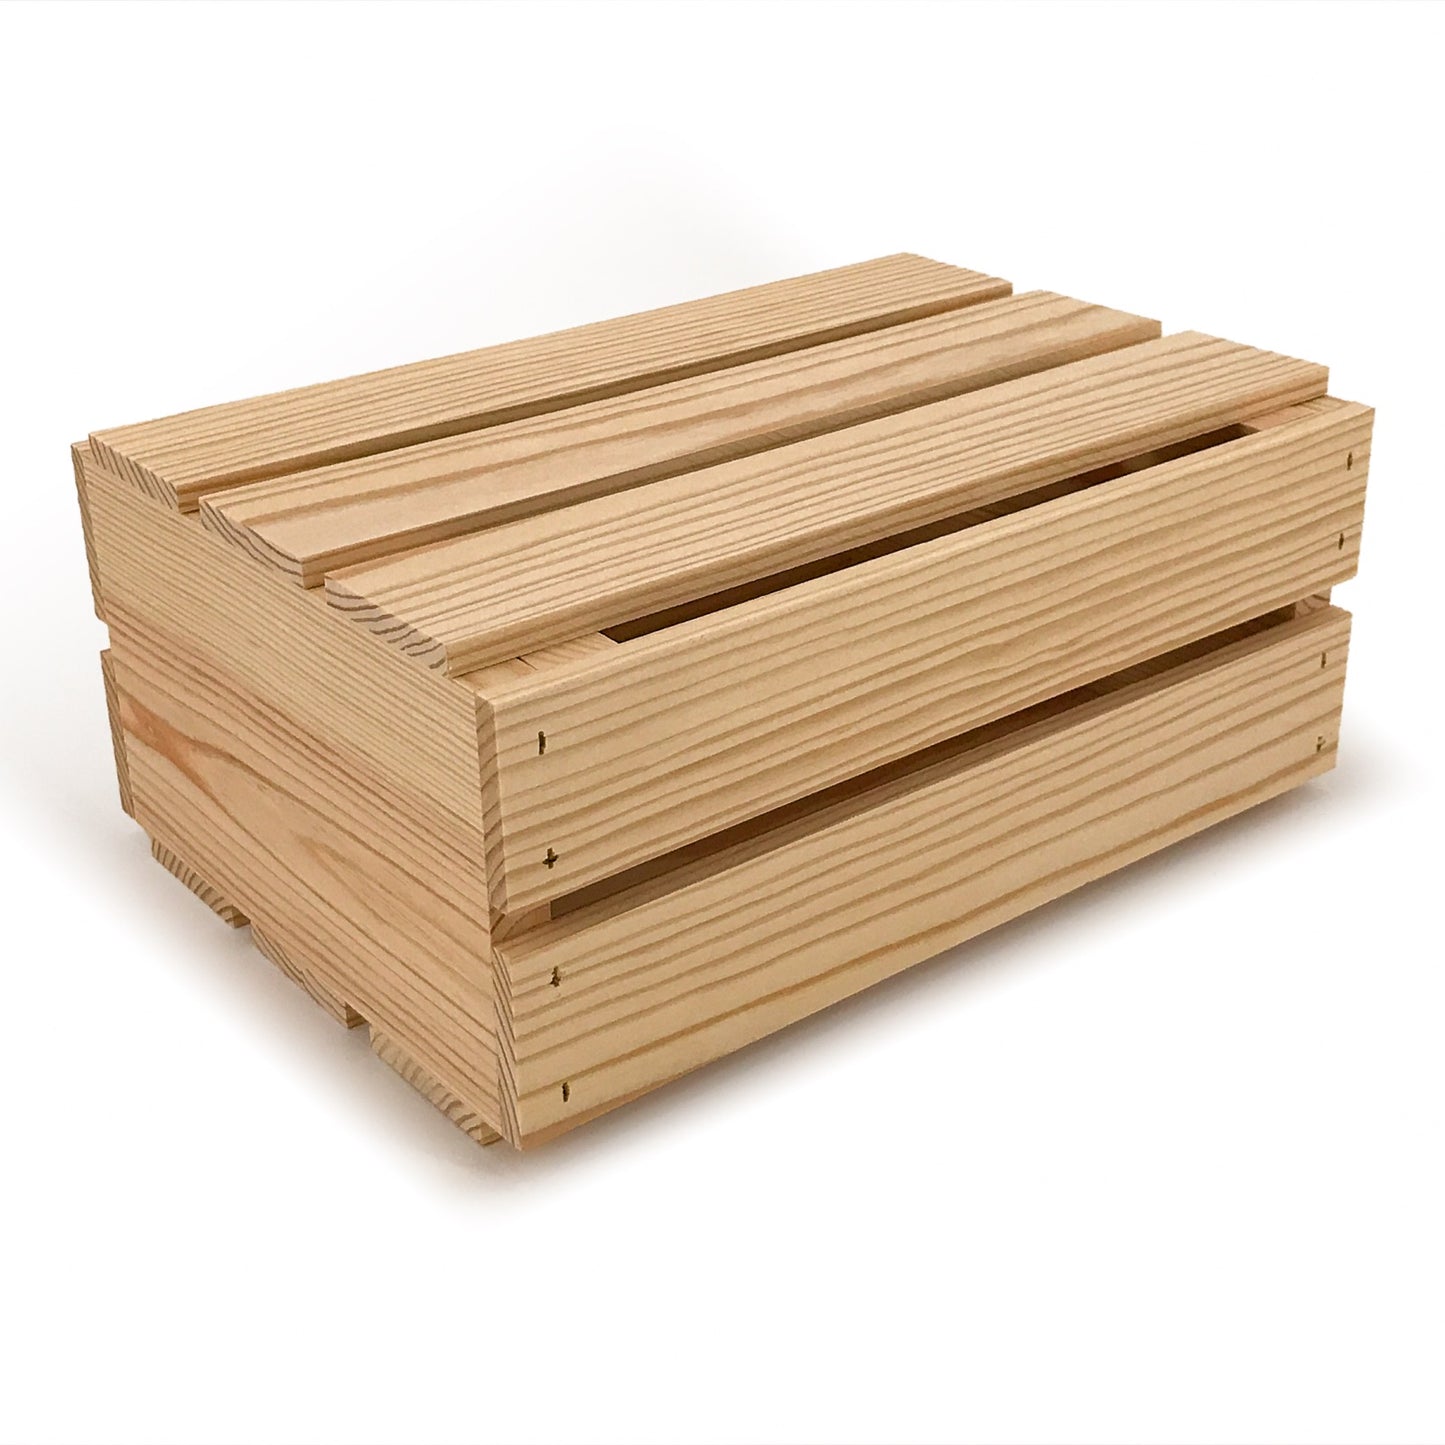 Small wooden crate with lid 12x9x5.25, 6-WS-12-9-5.25-NX-NW-LL, 12-WS-12-9-5.25-NX-NW-LL, 24-WS-12-9-5.25-NX-NW-LL, 48-WS-12-9-5.25-NX-NW-LL, 96-WS-12-9-5.25-NX-NW-LL